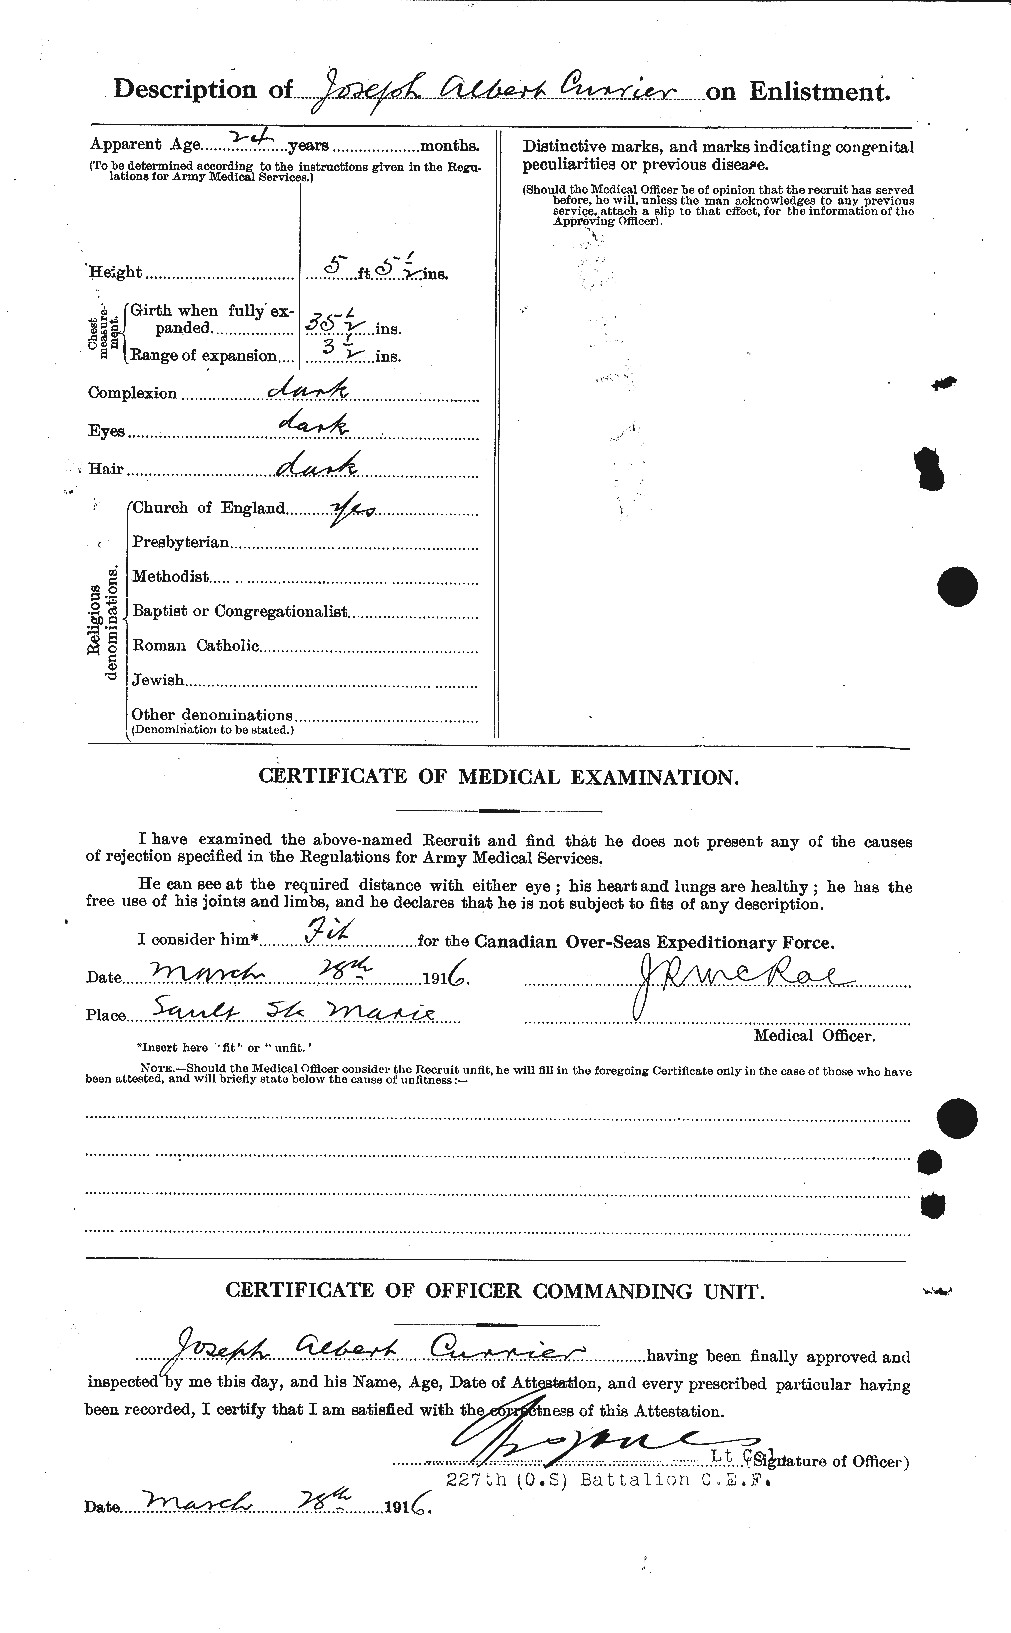 Personnel Records of the First World War - CEF 071405b